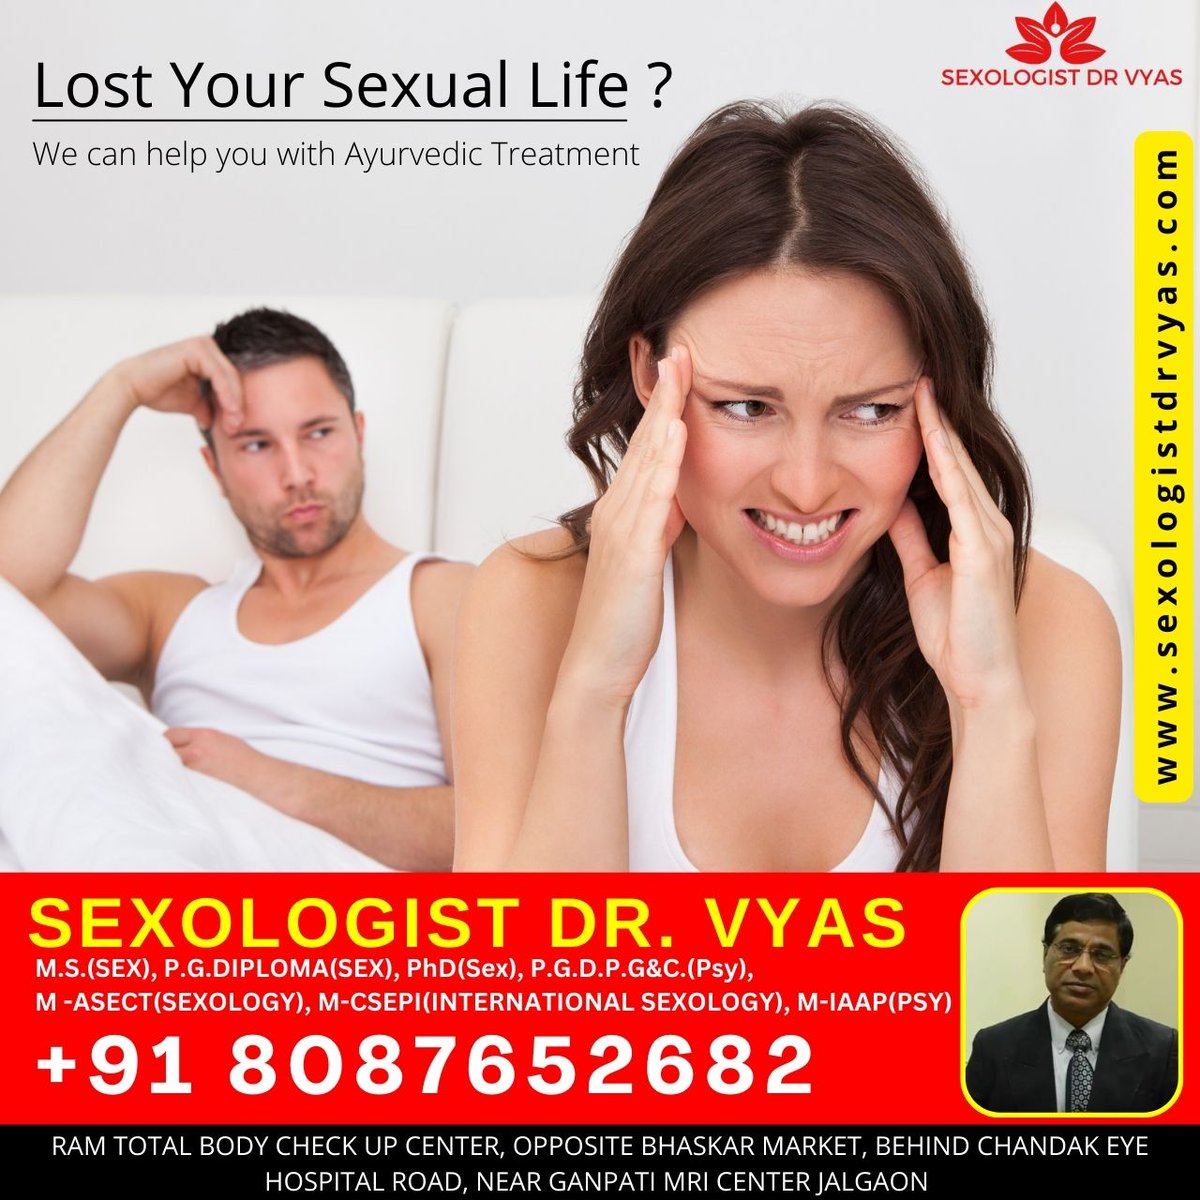 Lost Your Sexual Life?

Consult with
Sexologist Dr. Vyas
Web : sexologistdrvyas.com
Call : +91 8087652682

#sexologist #sexologistdrvyas #drvyas #sexproblem #sexdoctor #sexologist